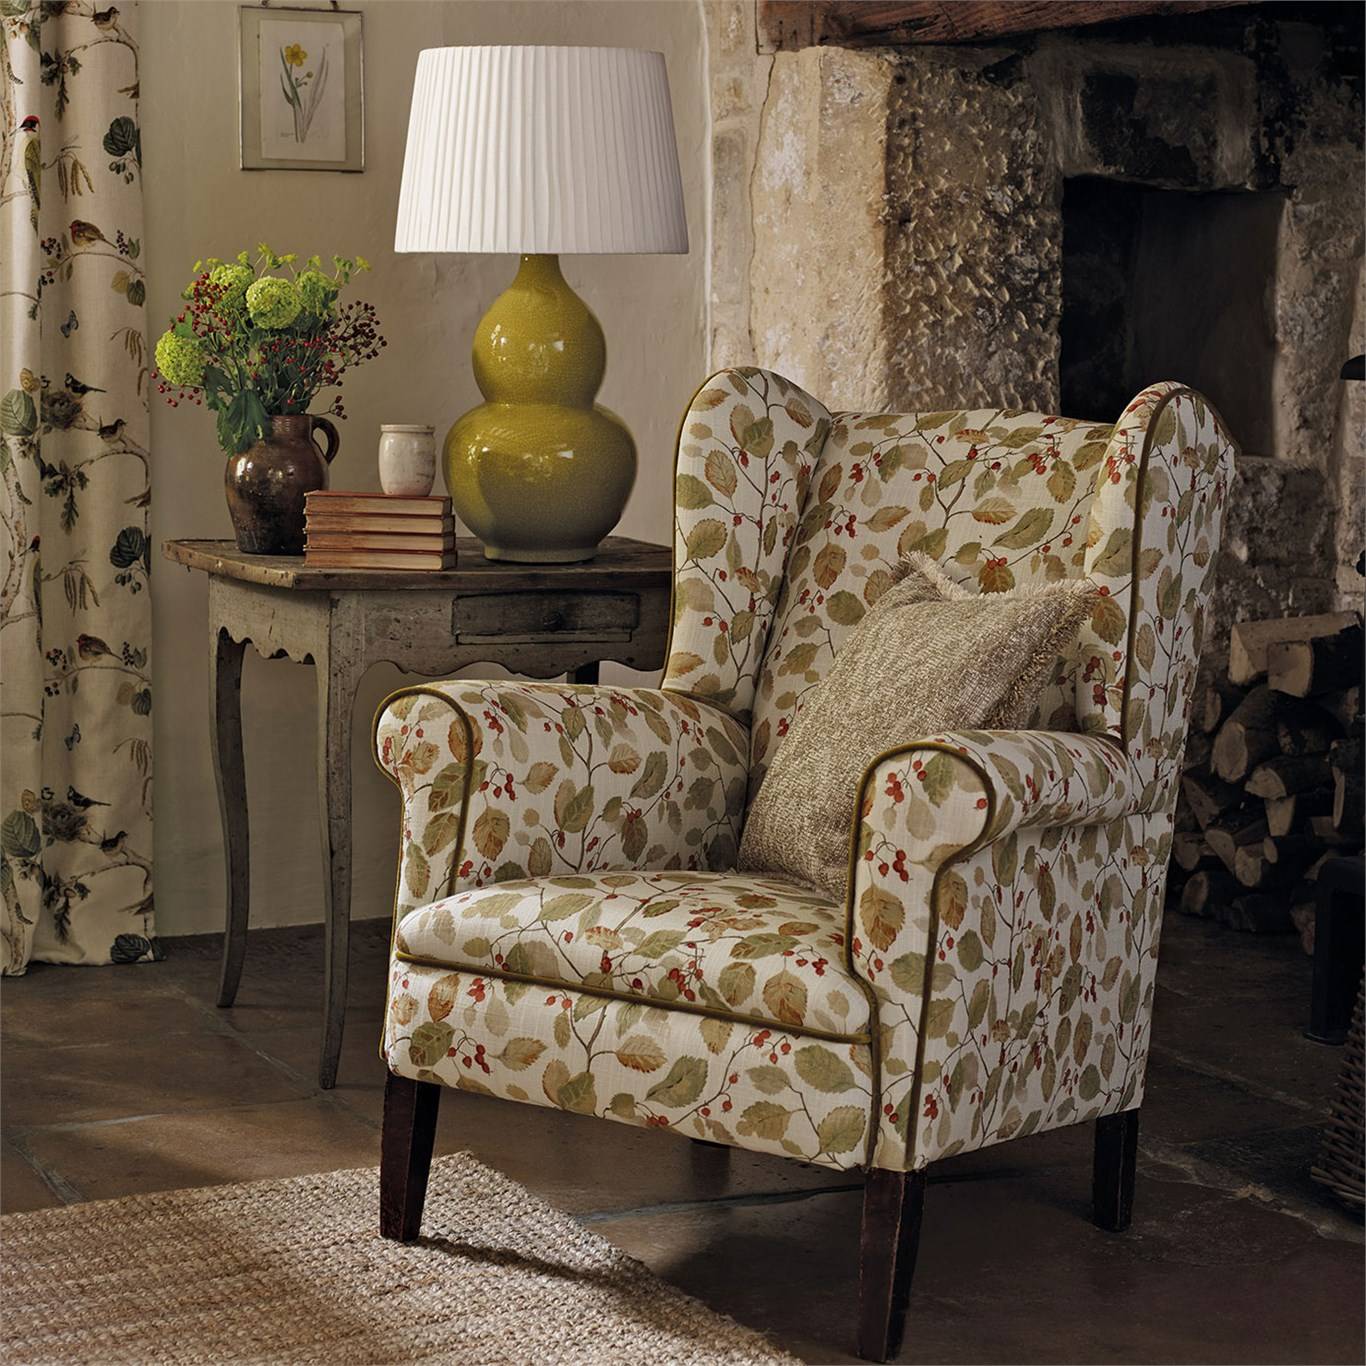 Sanderson Collection Woodland , fabric Berries